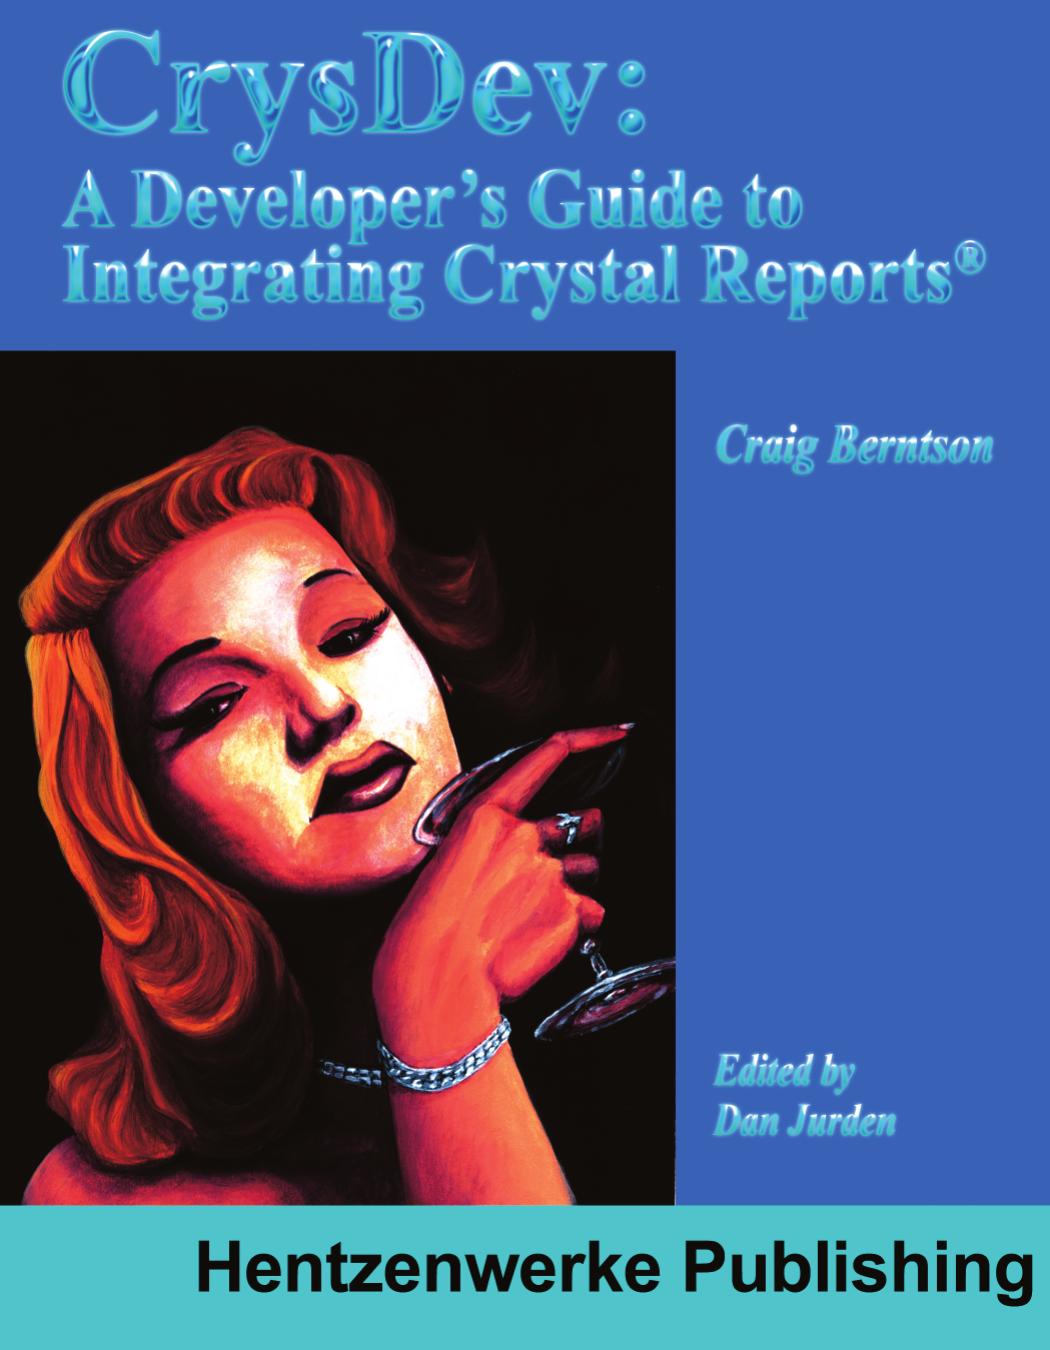 CrysDev: A Developer's Guide to Integrating Crystal Reports